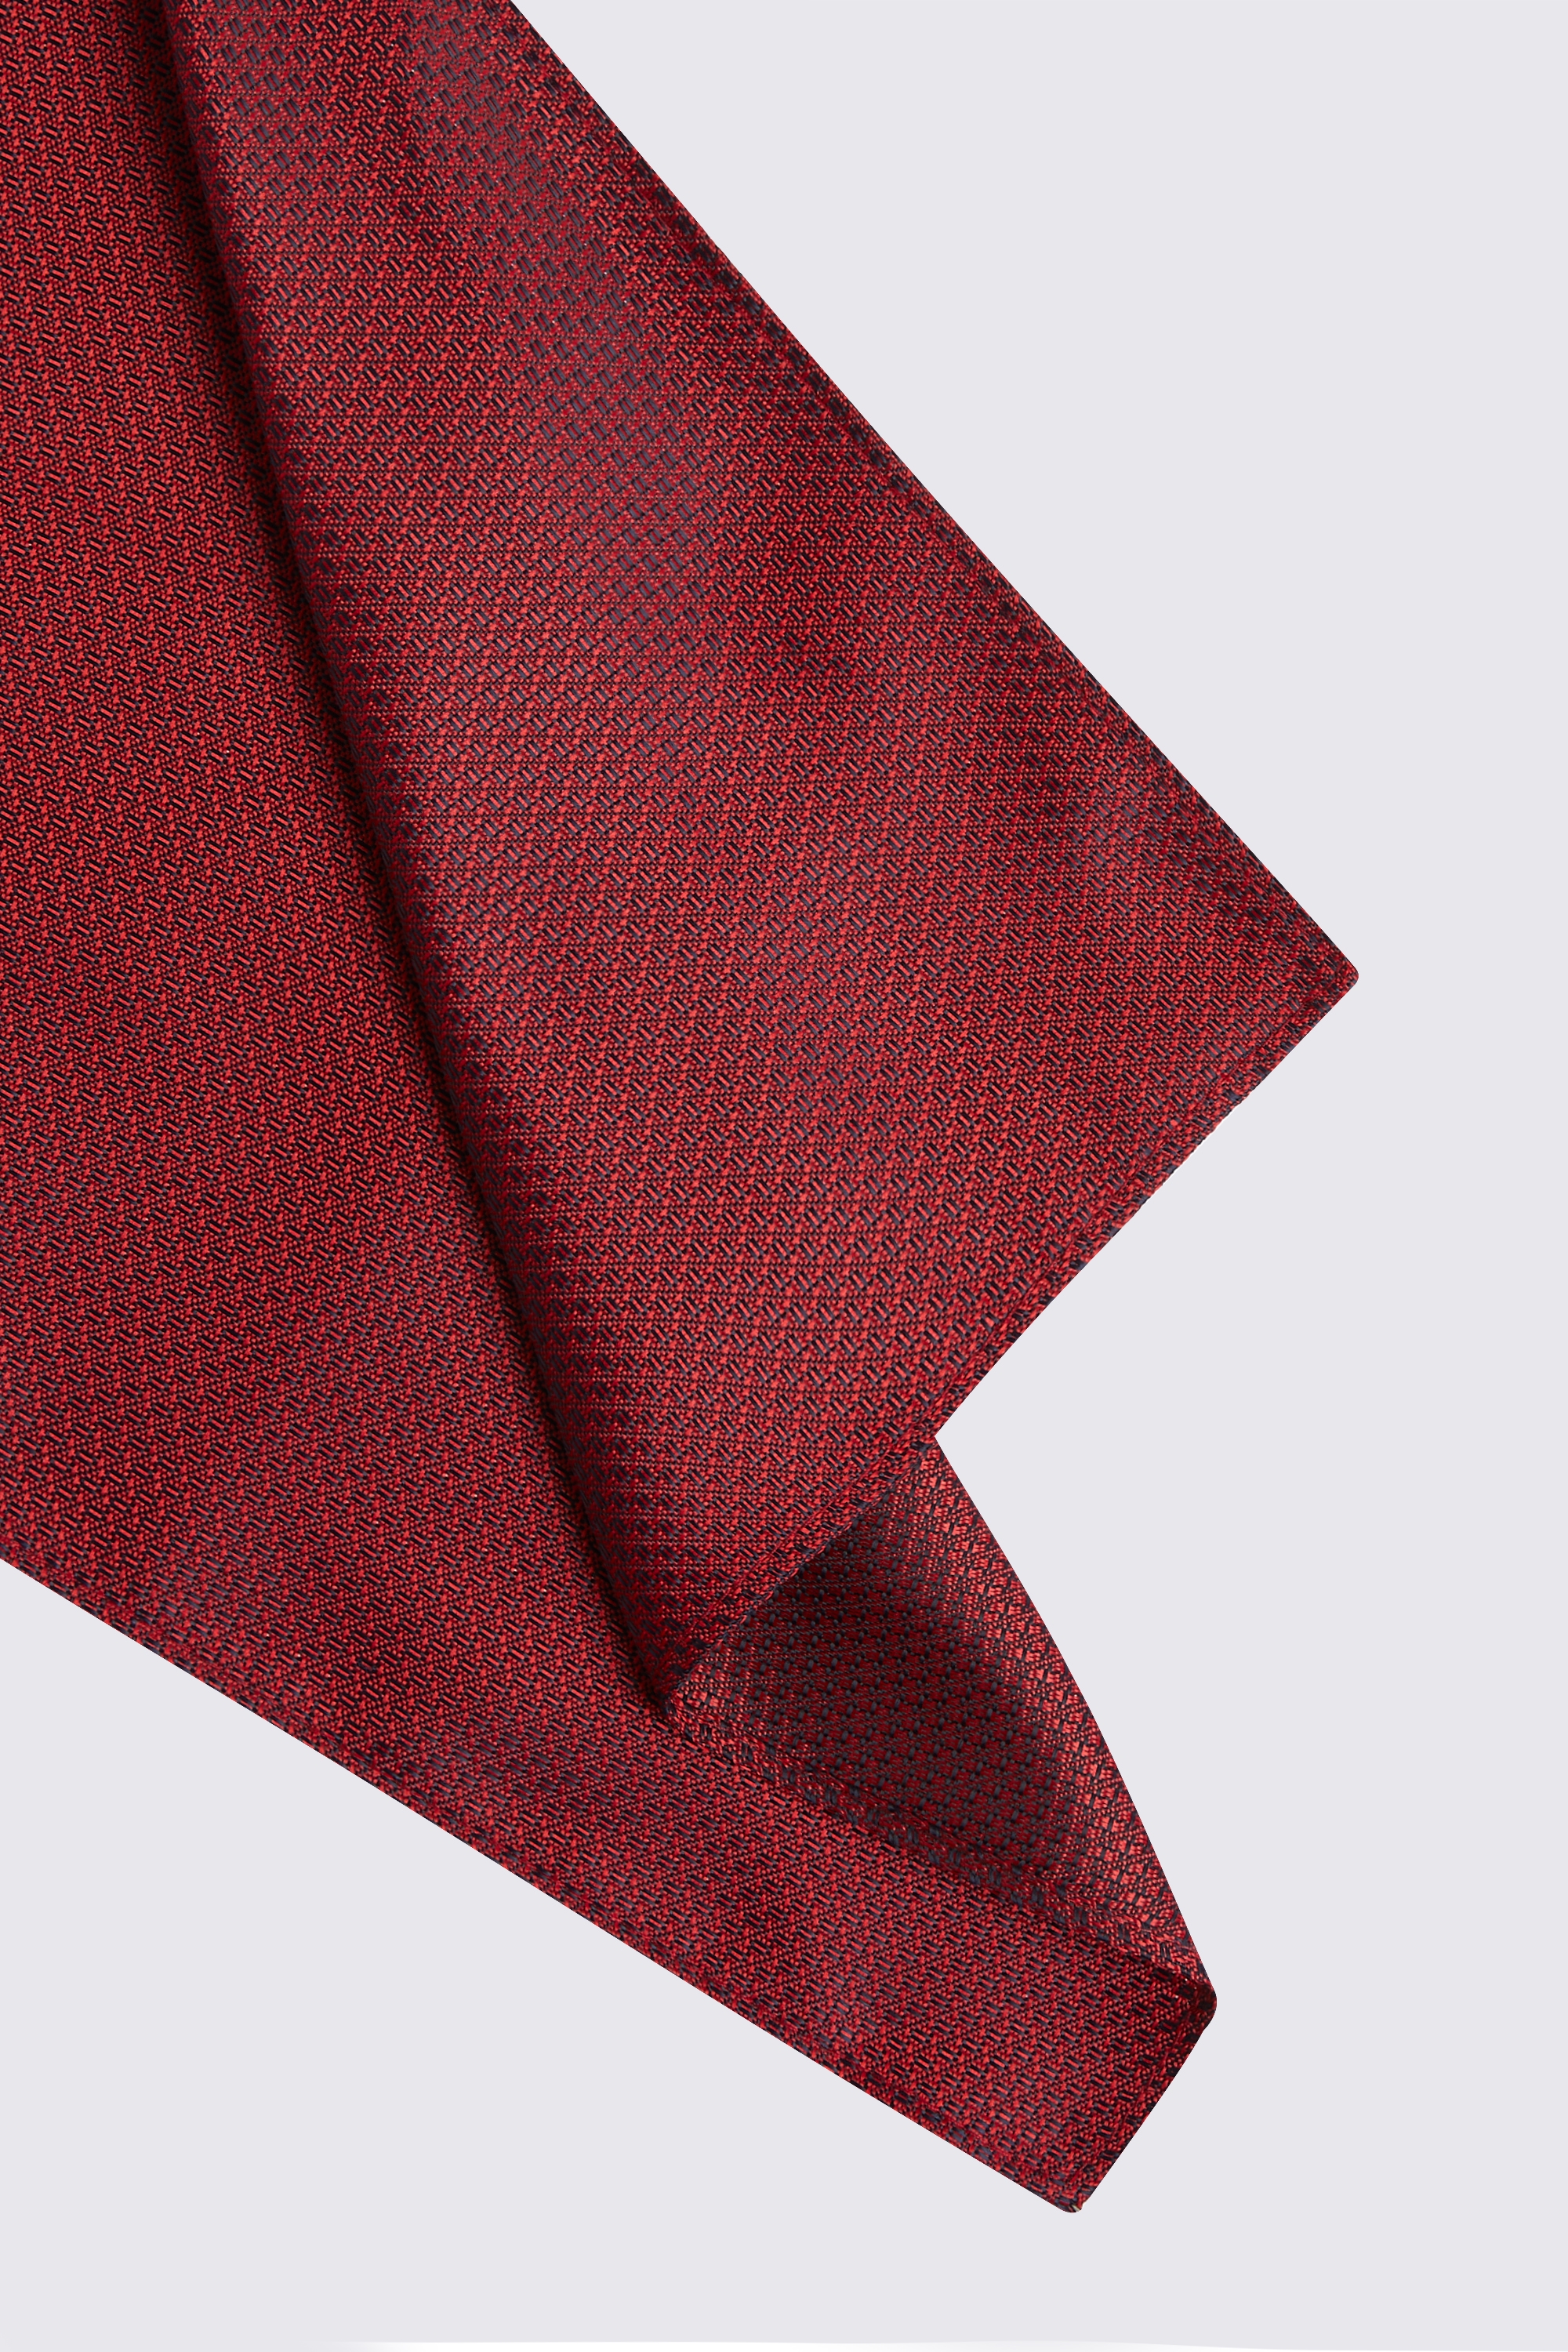 Red Textured Pocket Square | Buy Online at Moss